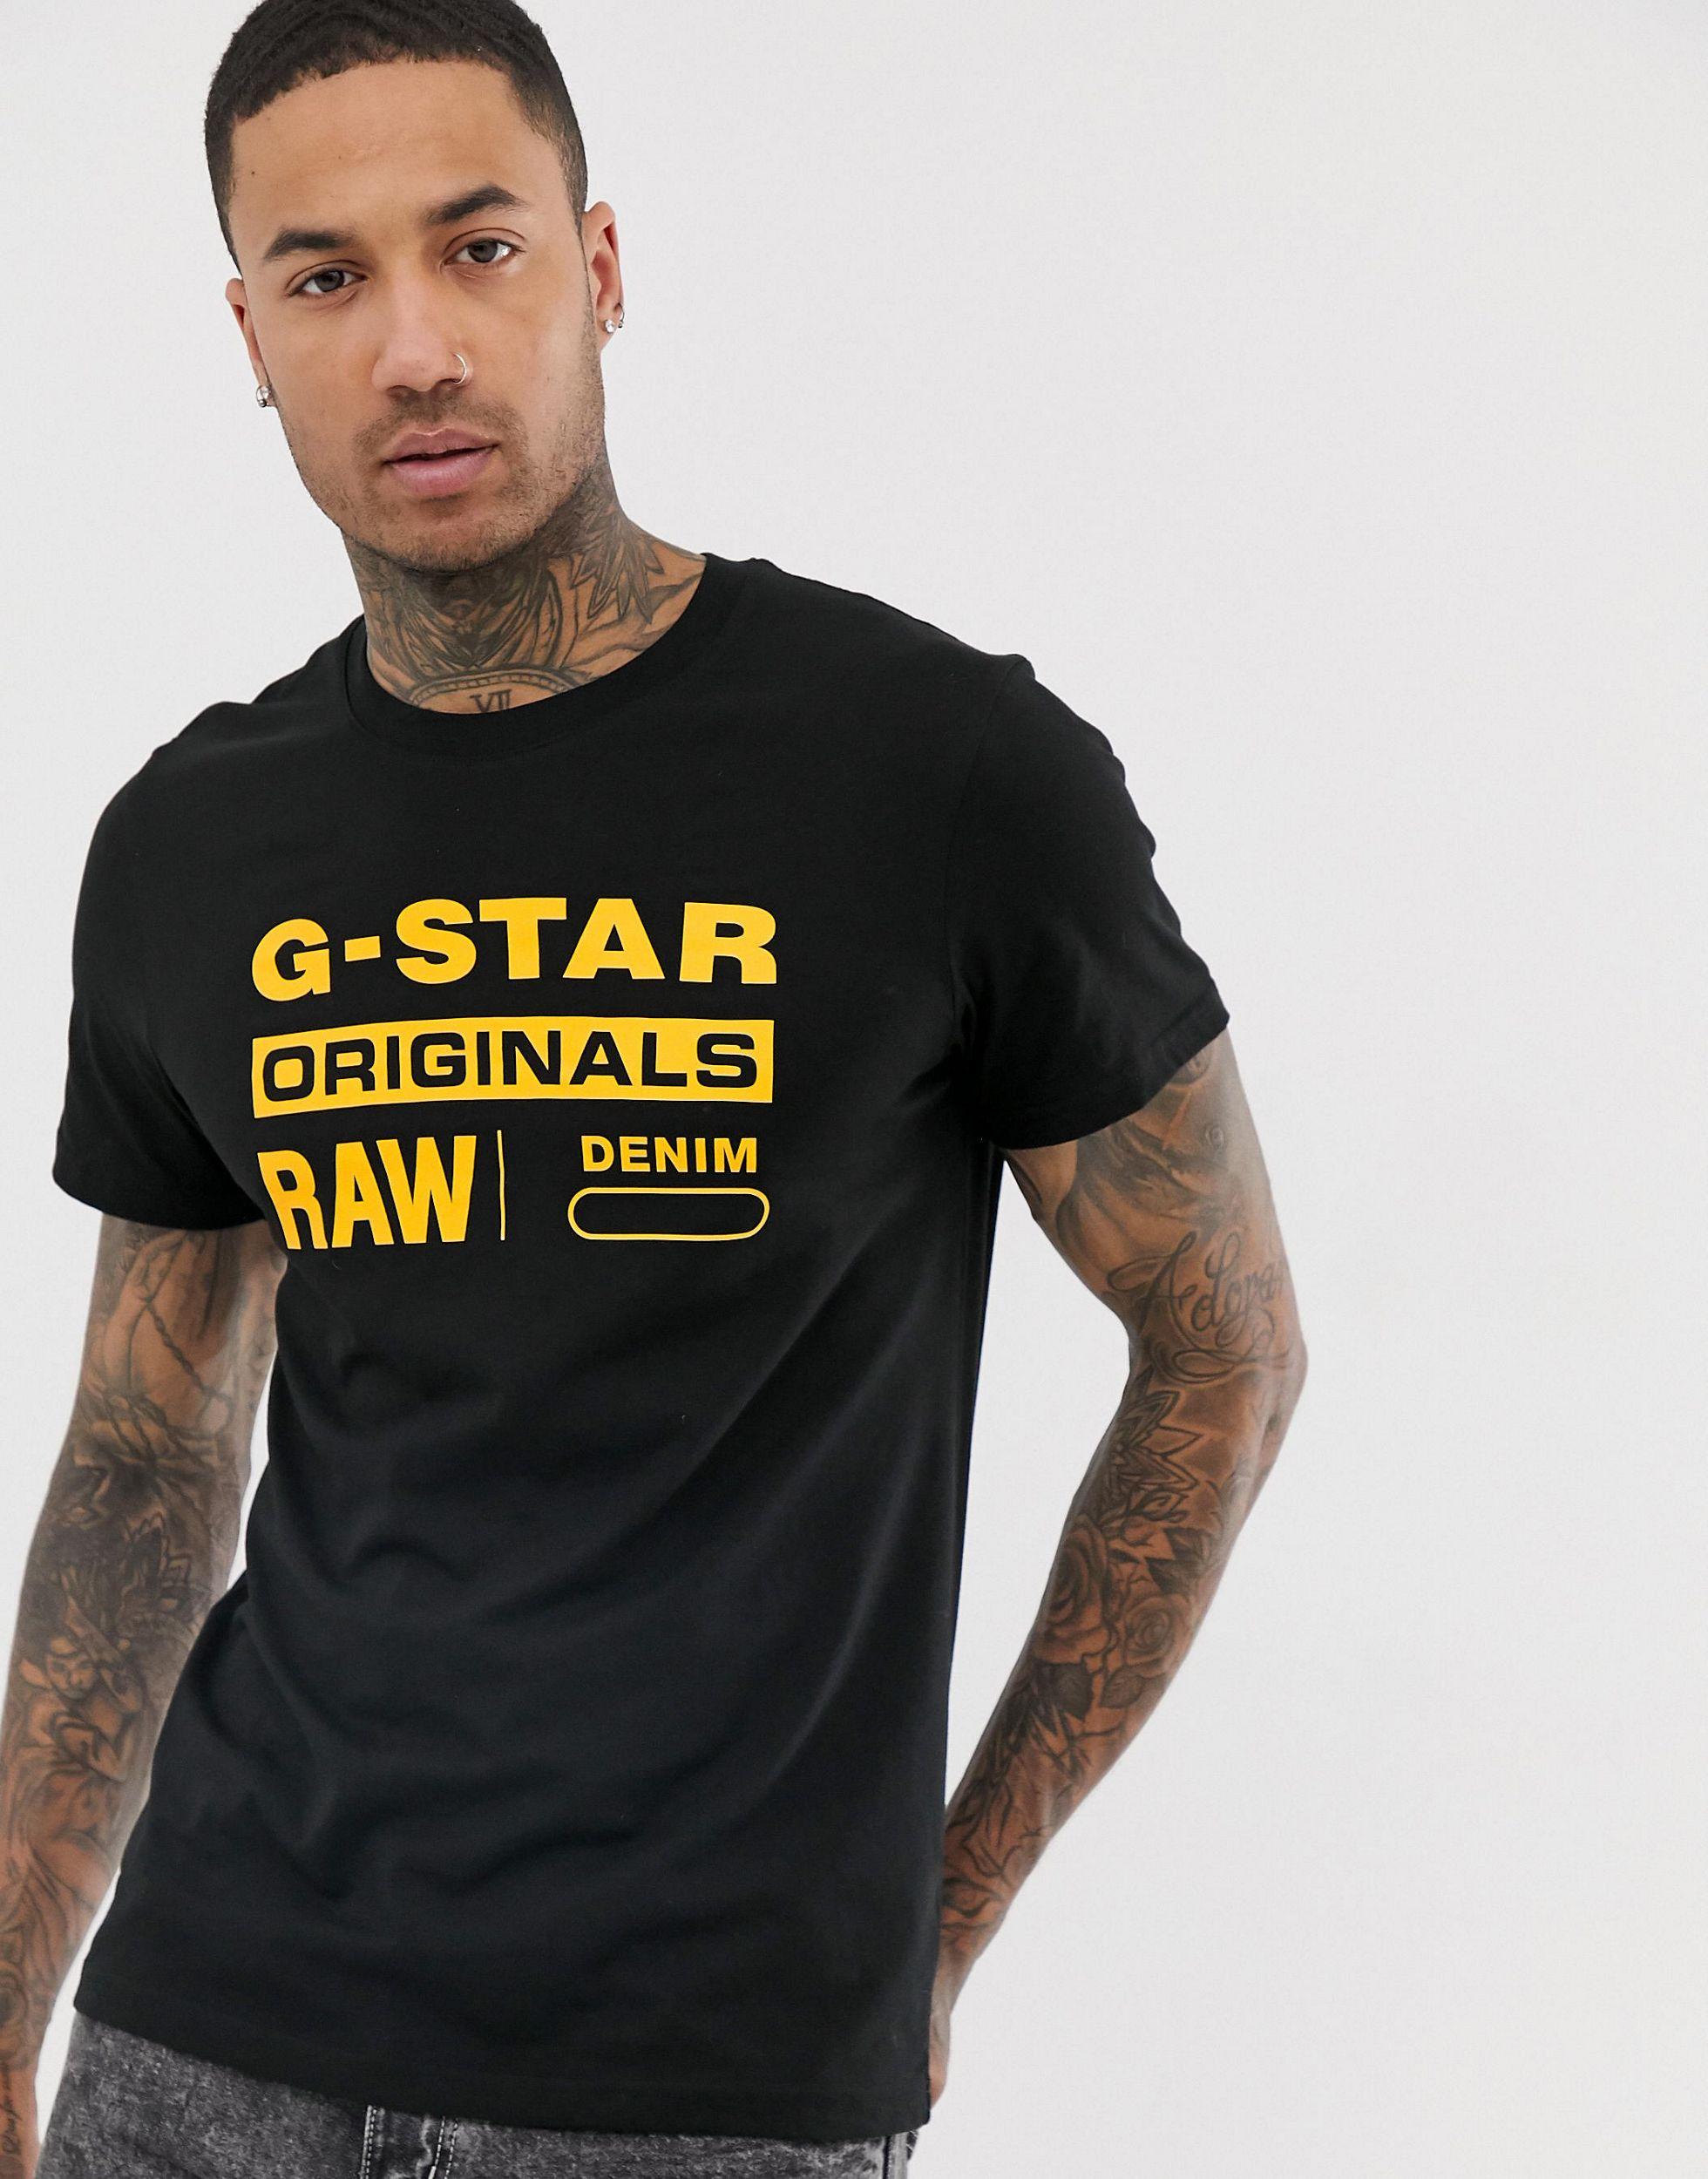 G-Star RAW Cotton Men's Graphic 8 T-shirt in Black for Men - Lyst